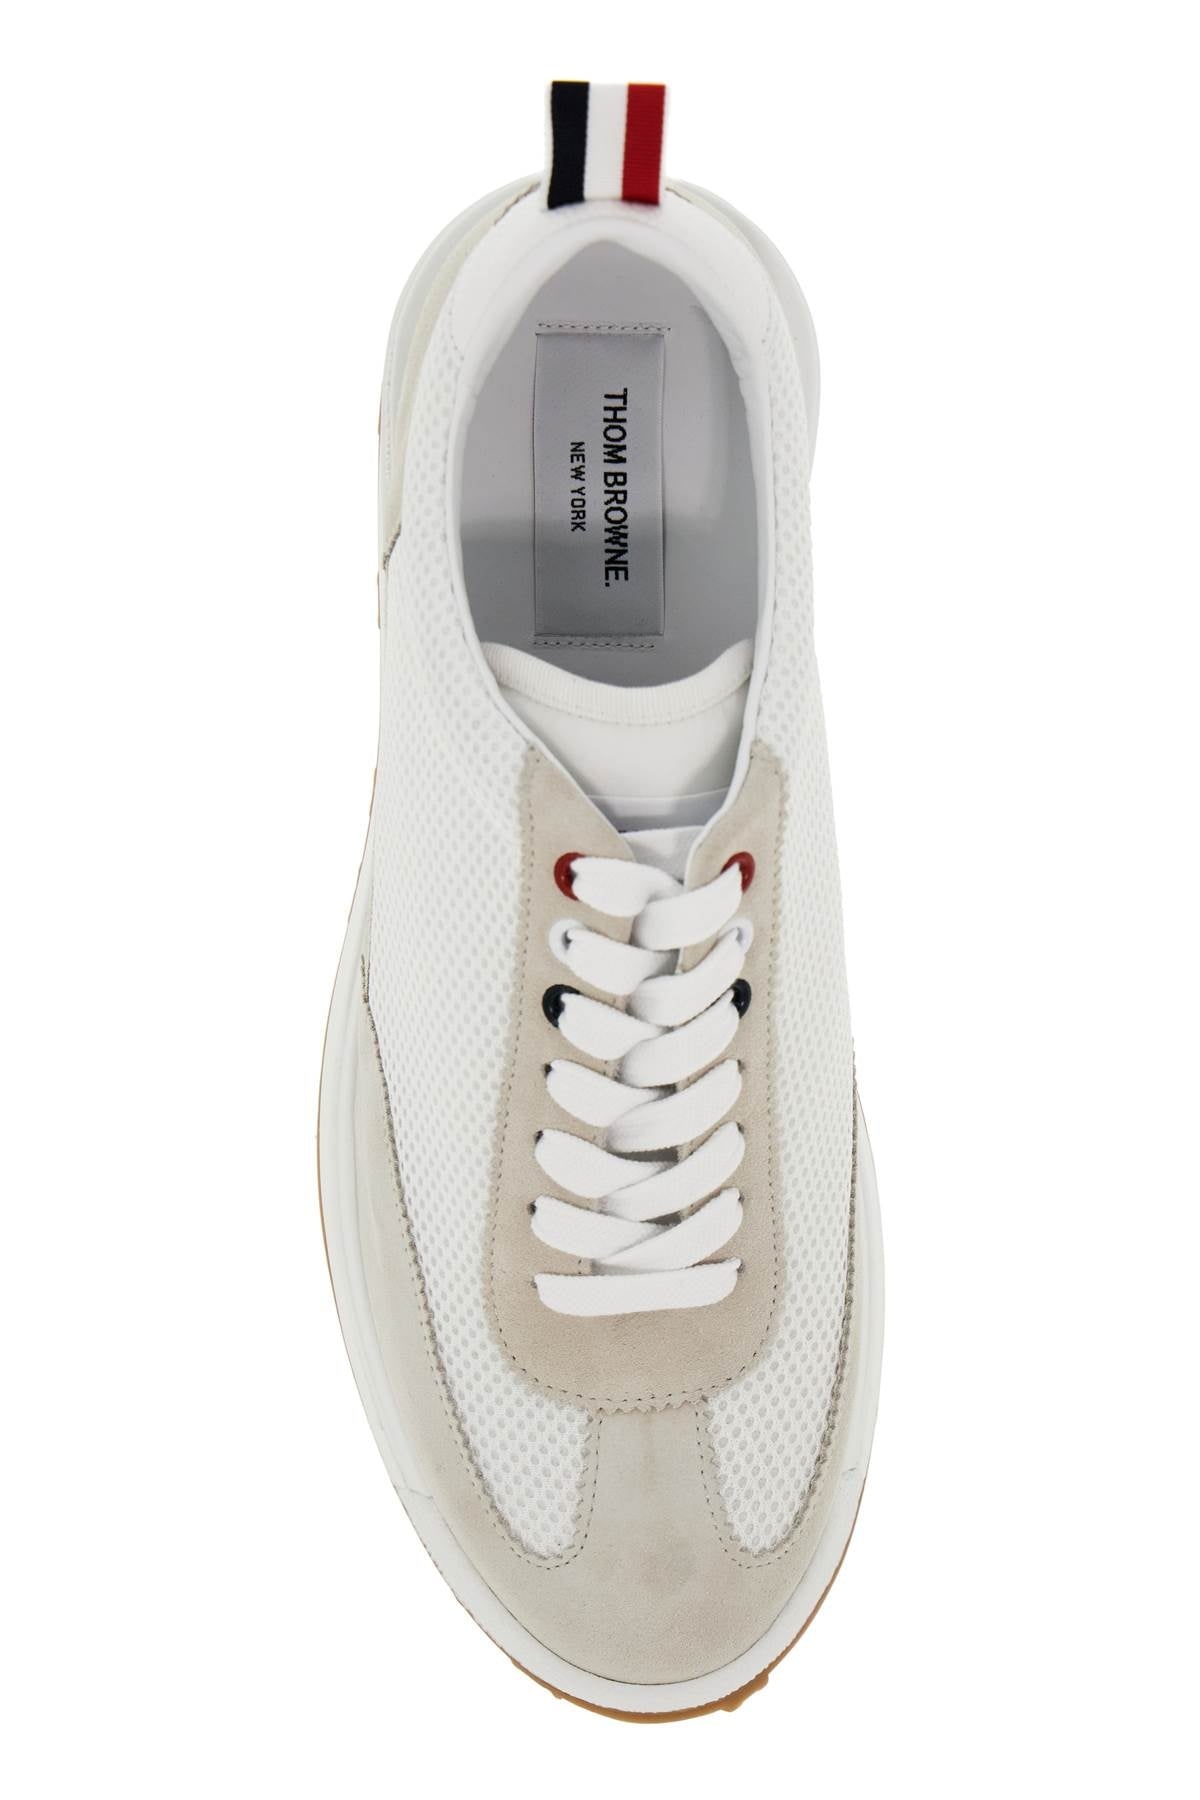 Thom Browne Mesh And Suede Leather Sneakers In 9 Men - 2